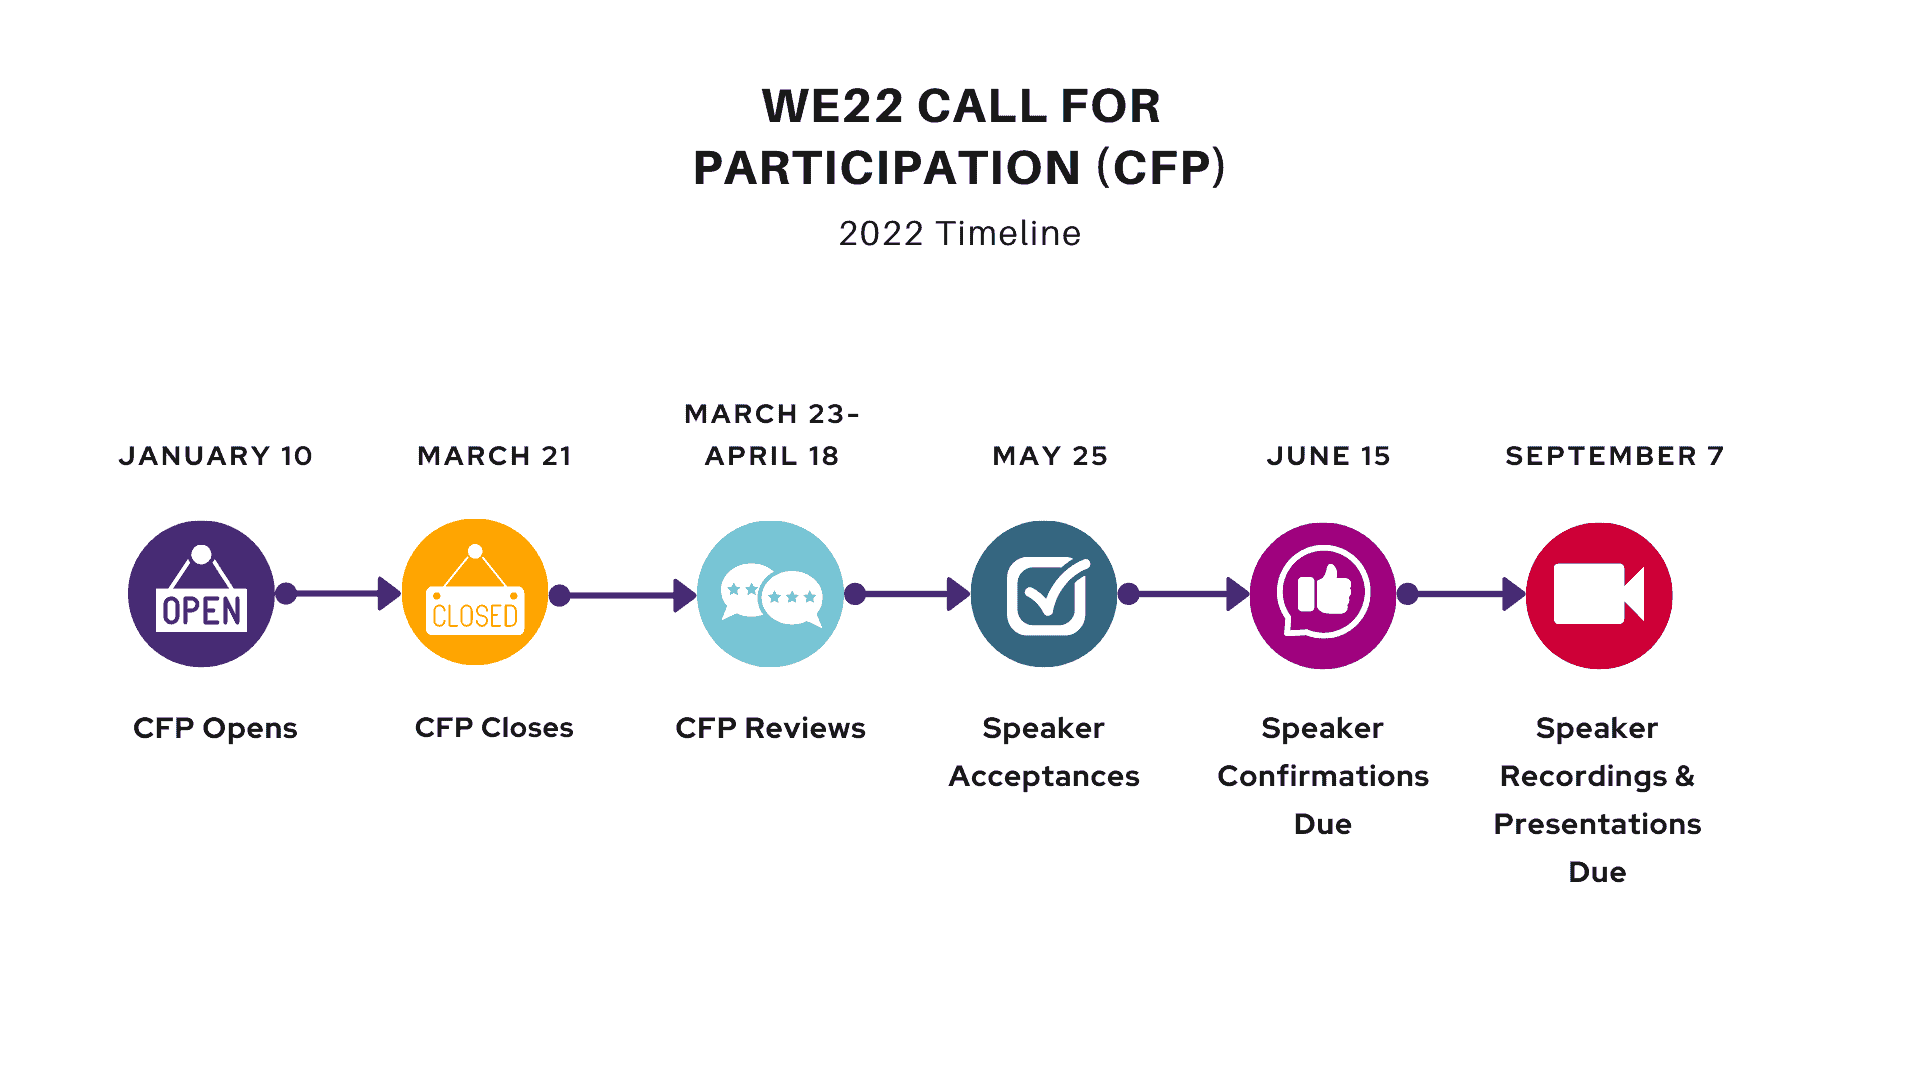 WE22 Call for Participation (CFP) Is Now Open - WE22